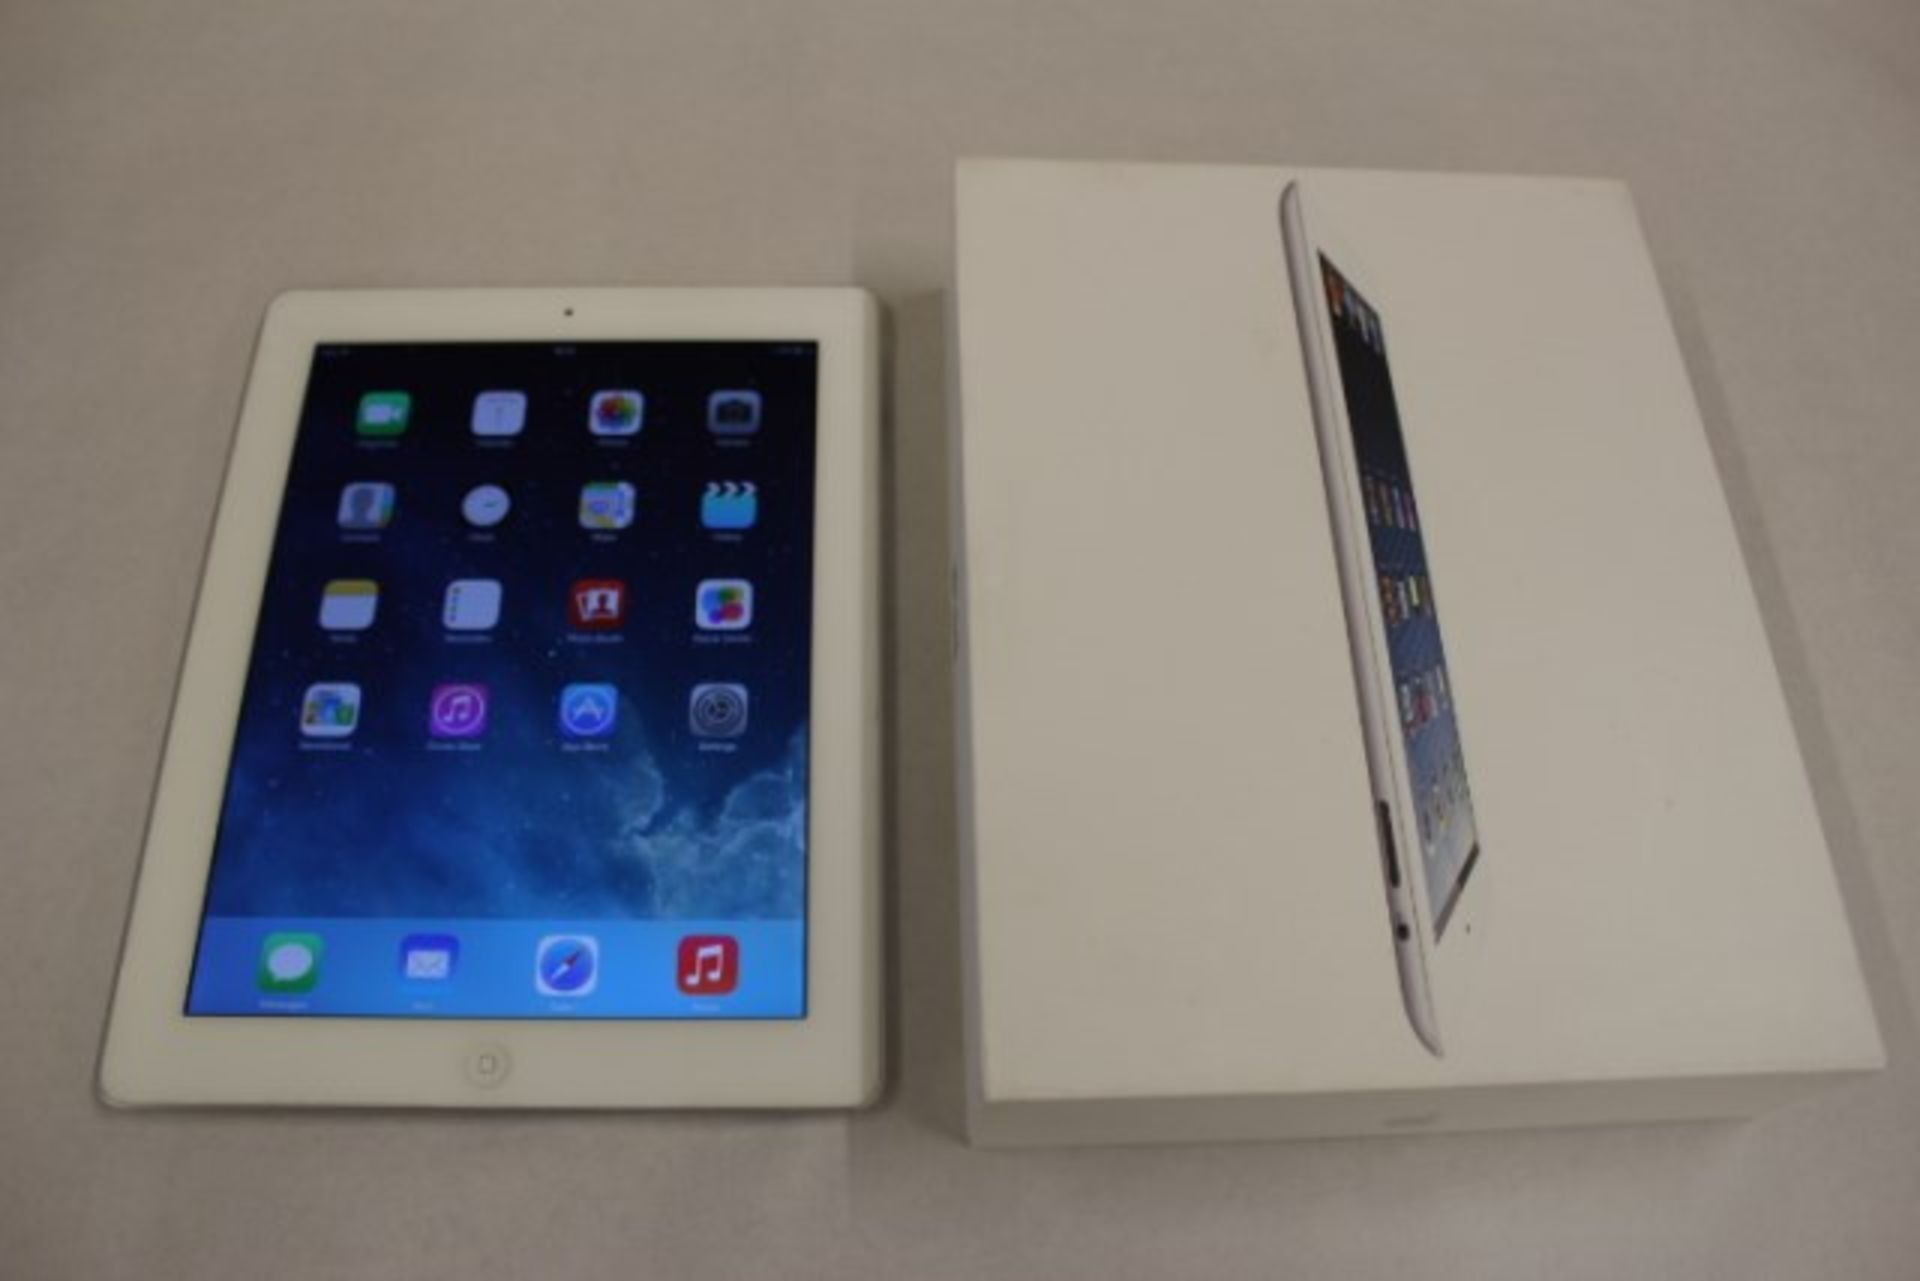 V iPad 4 16Gb White Boxed - Original Box With Two Cameras/Retina Display Etc - Factory Graded - Image 2 of 2